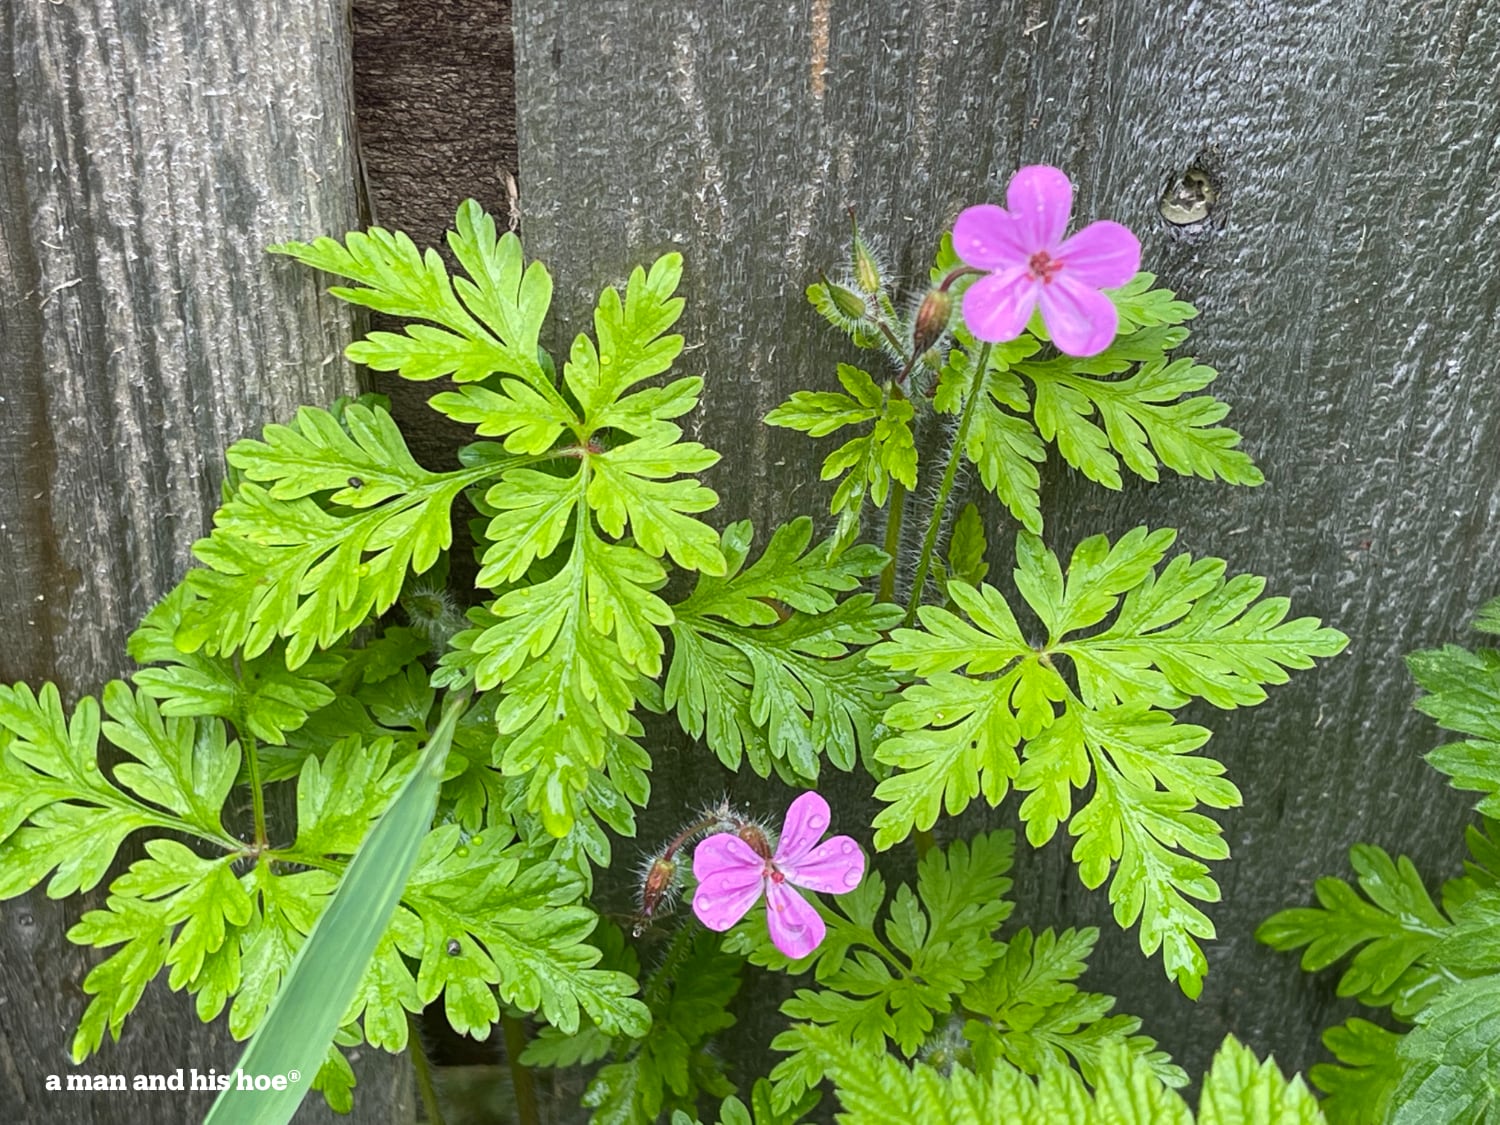 Purple flowers bloom against a wooden fence.